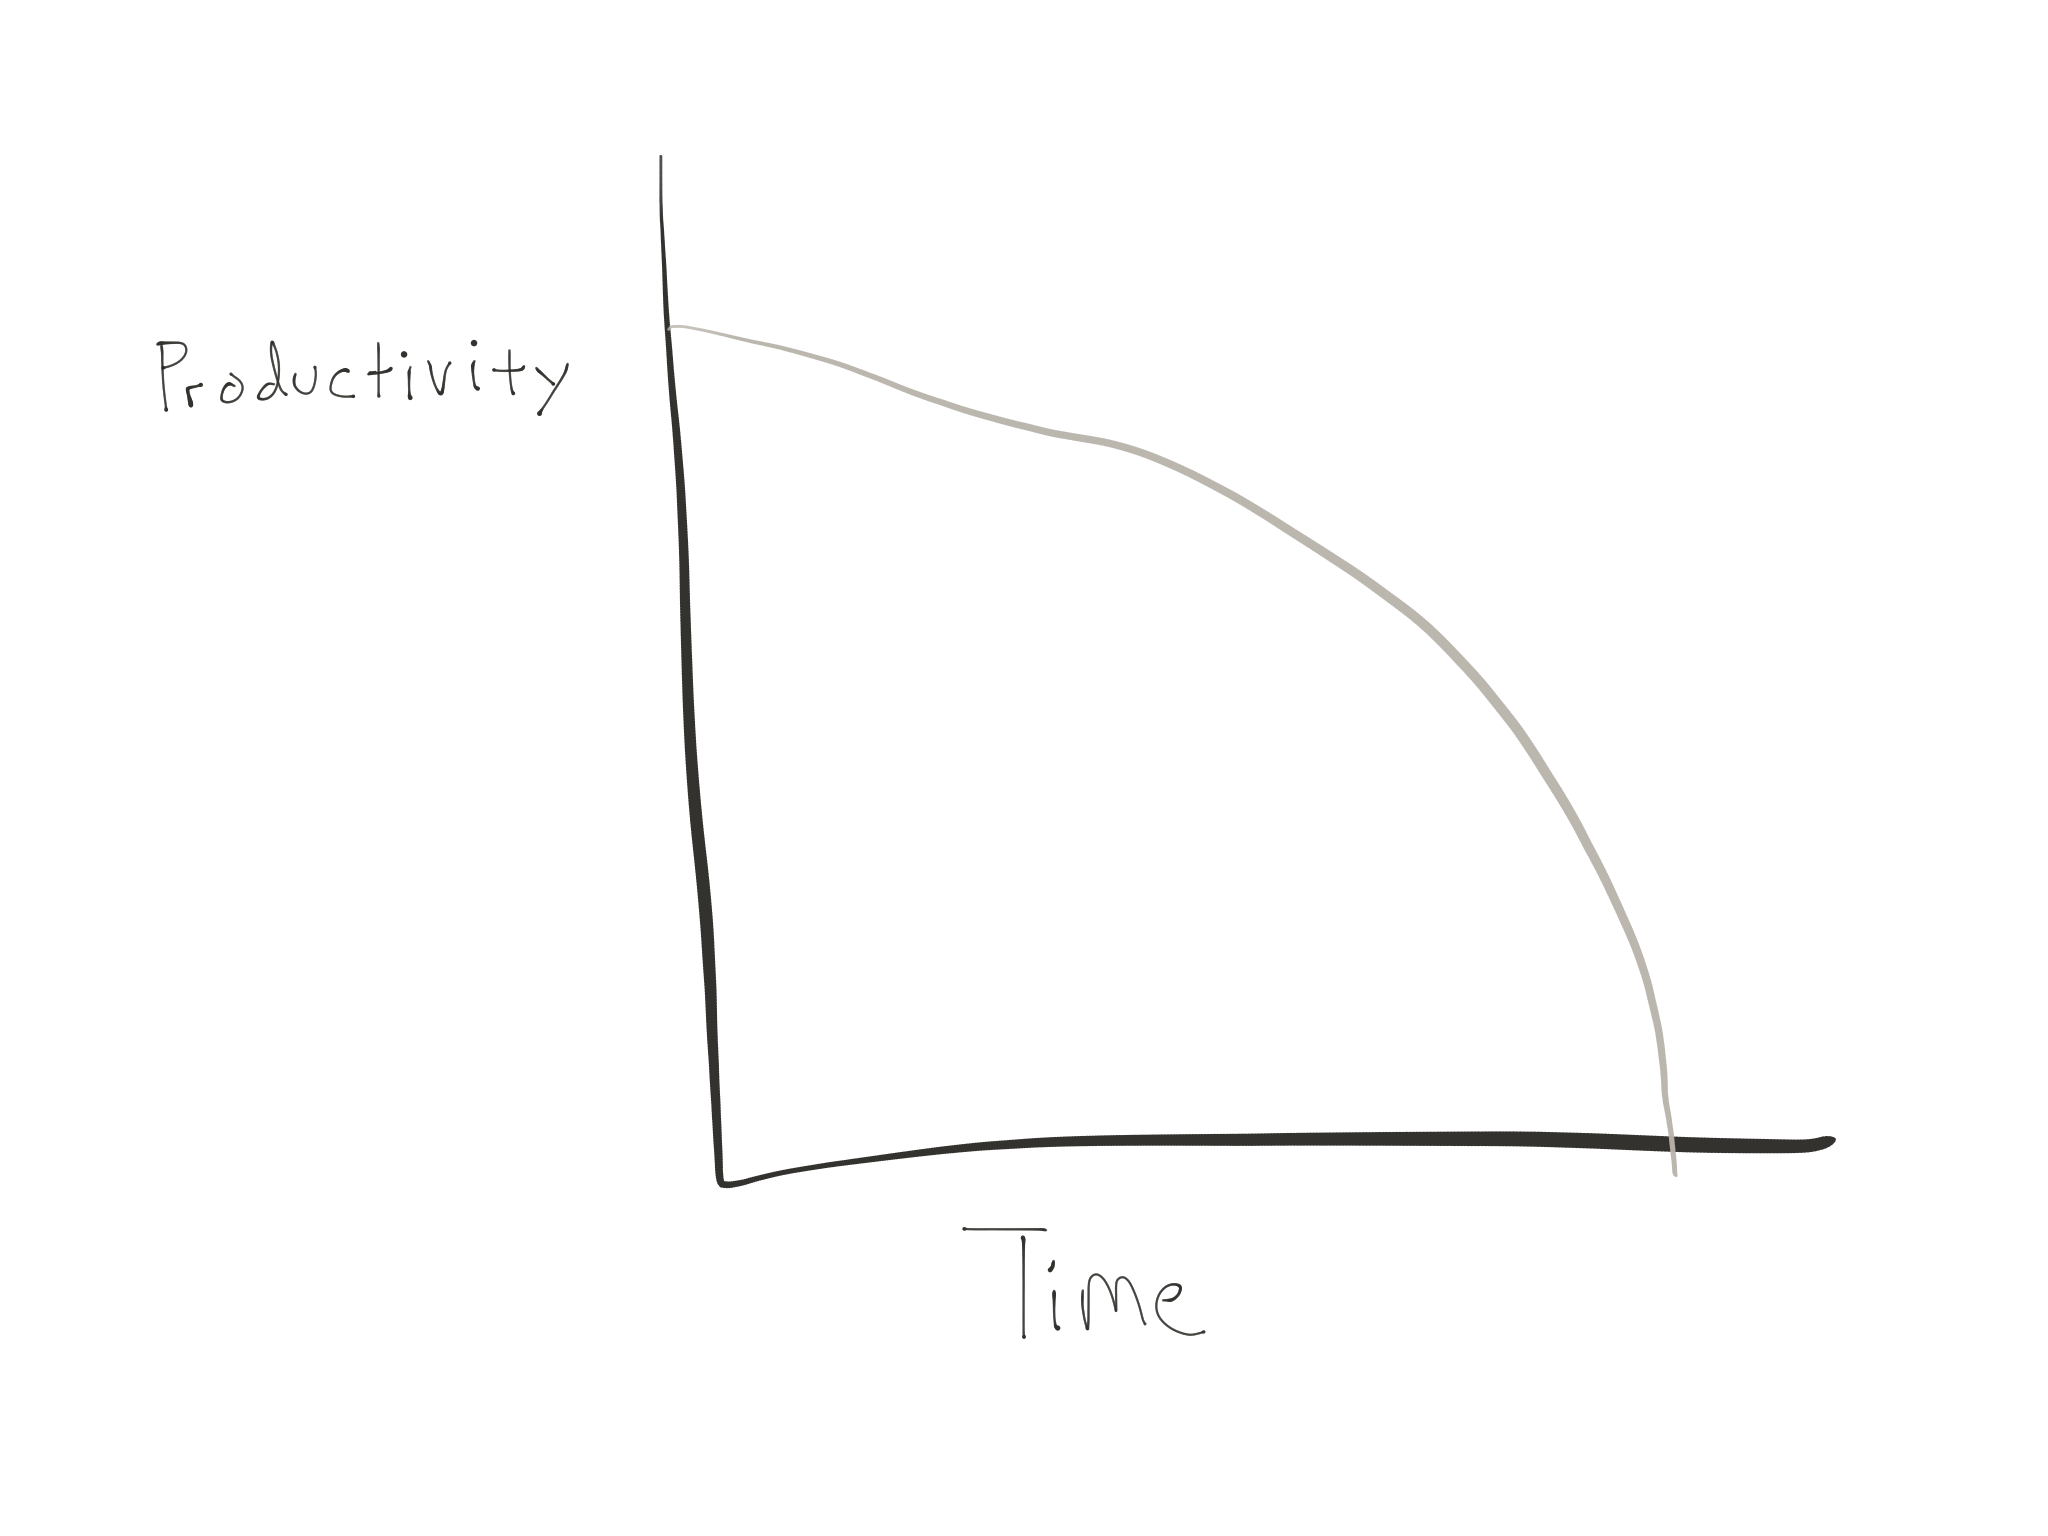 graph of the decreasing productivity over time of technical debt